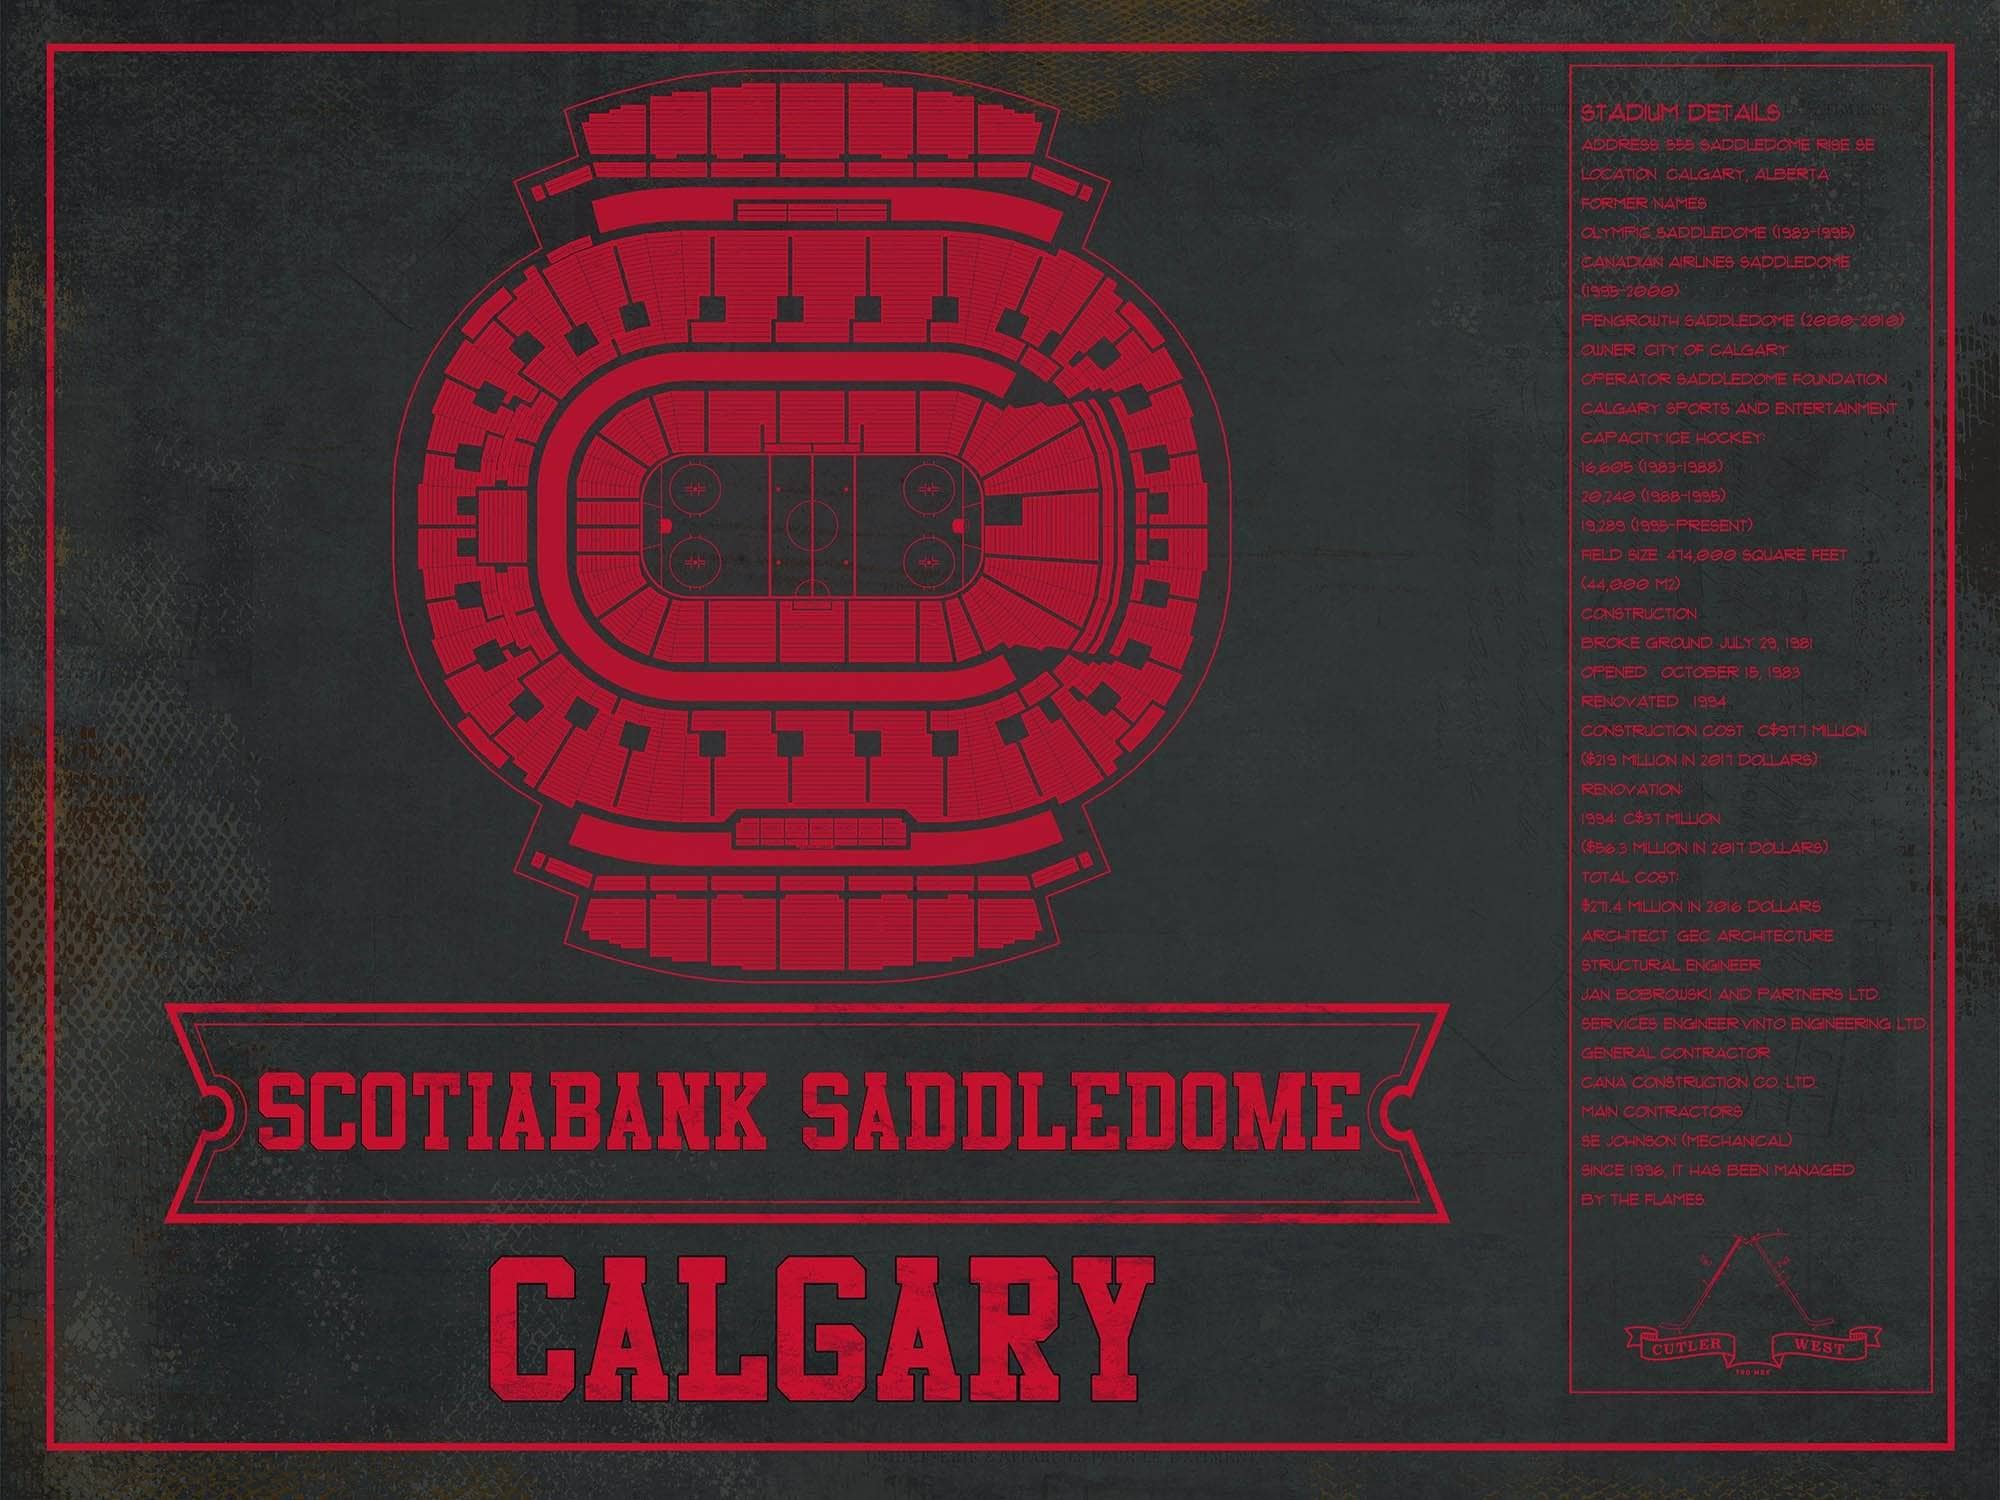 Cutler West 14" x 11" / Unframed Calgary Flames Scotiabank Saddledome Seating Chart - Vintage Hockey Team Color Print 673818887-TEAM